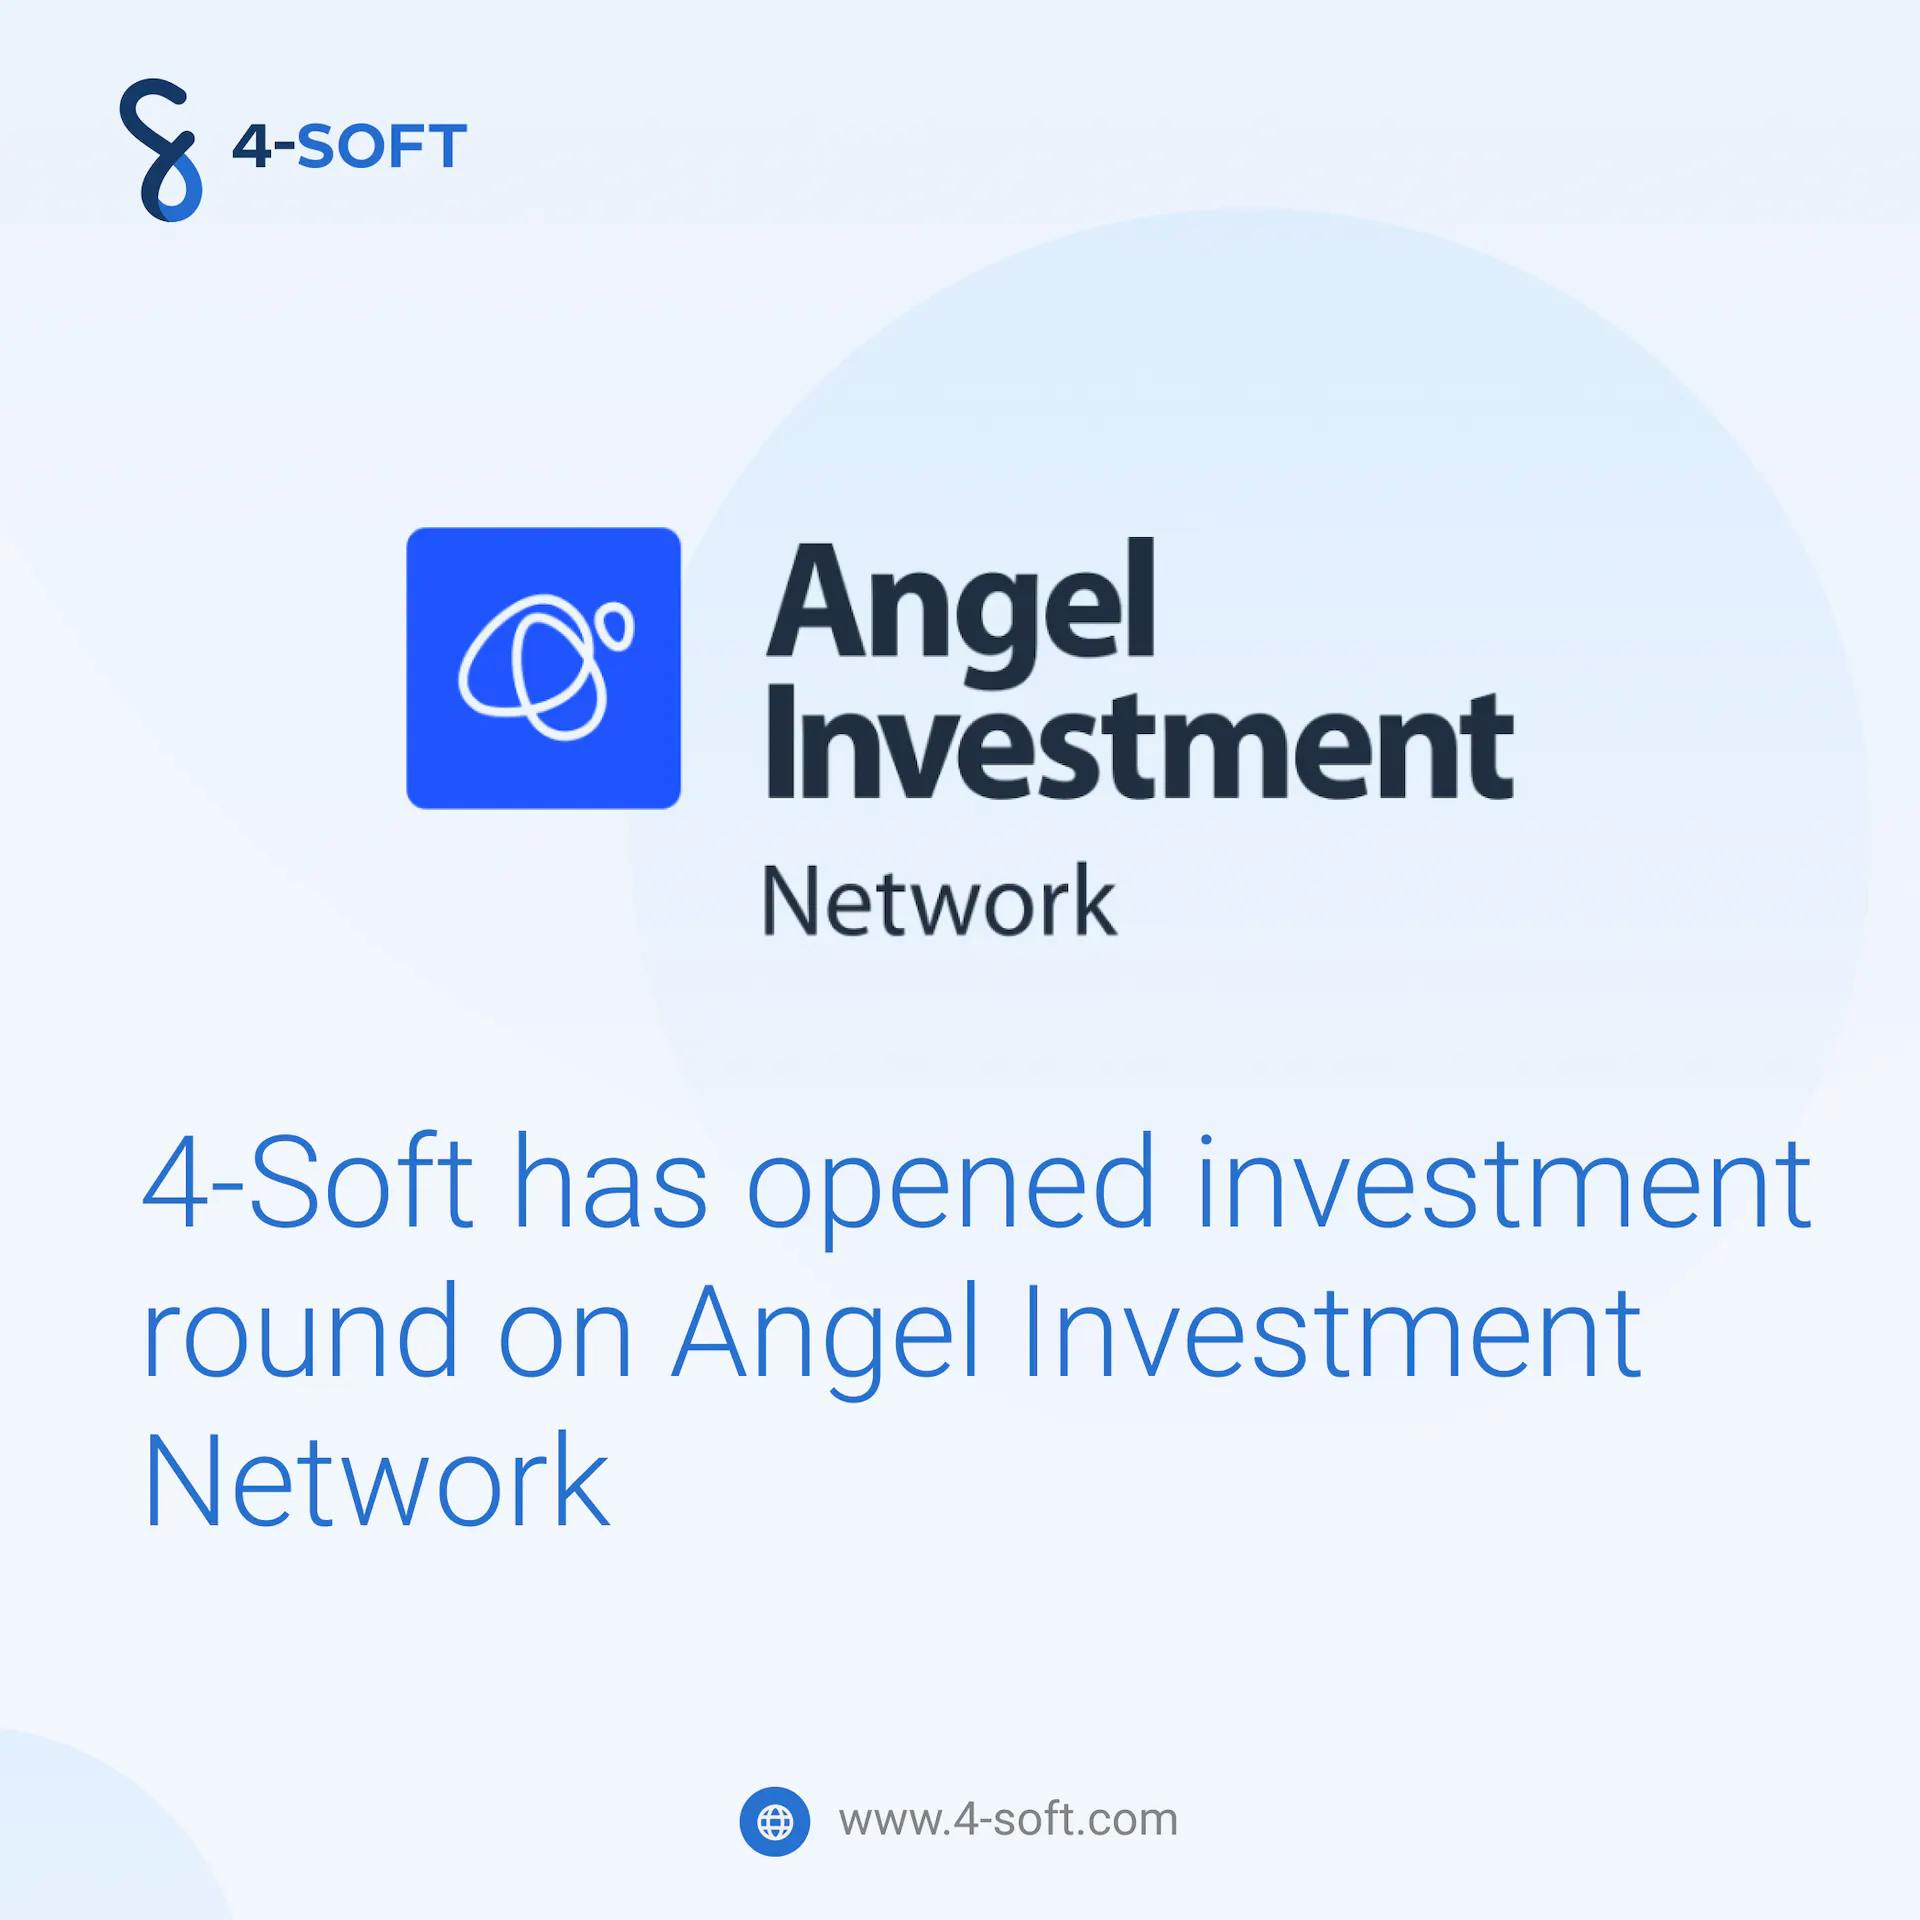 4-Soft Opens Roround on Angel Investment Network